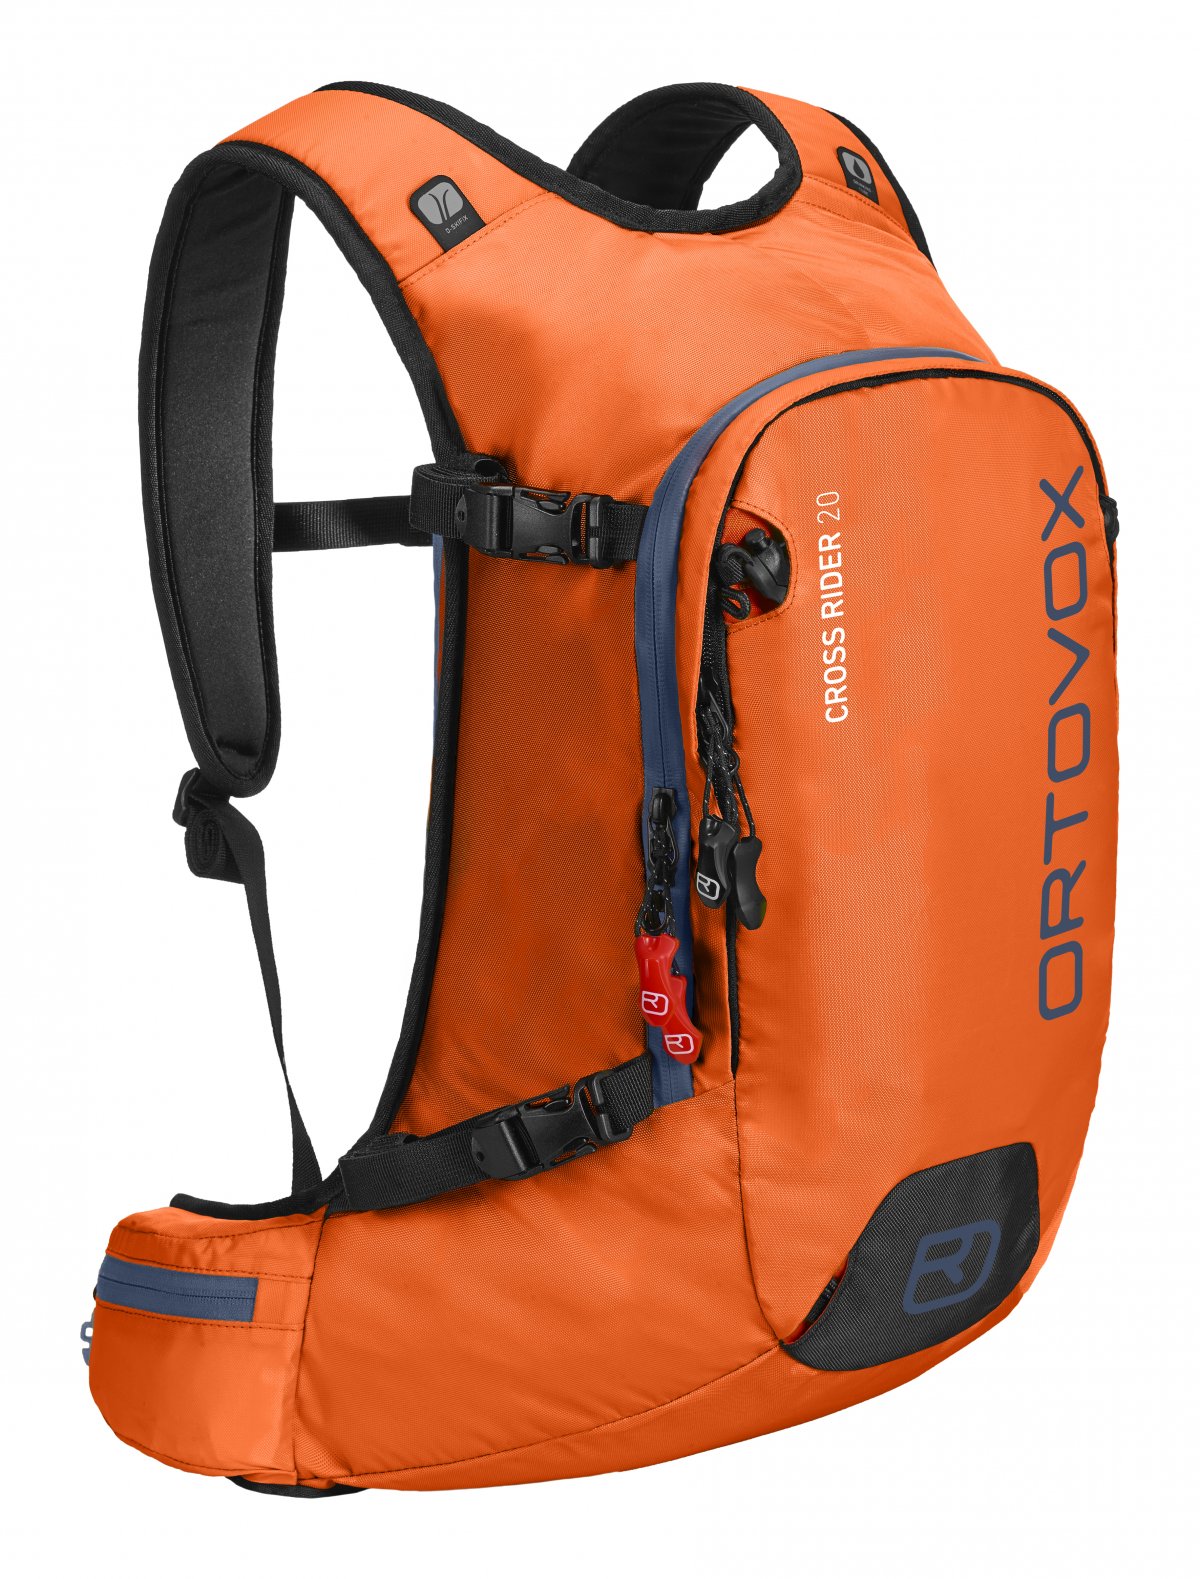 Ortovox Crossrider 20 Backpack Review